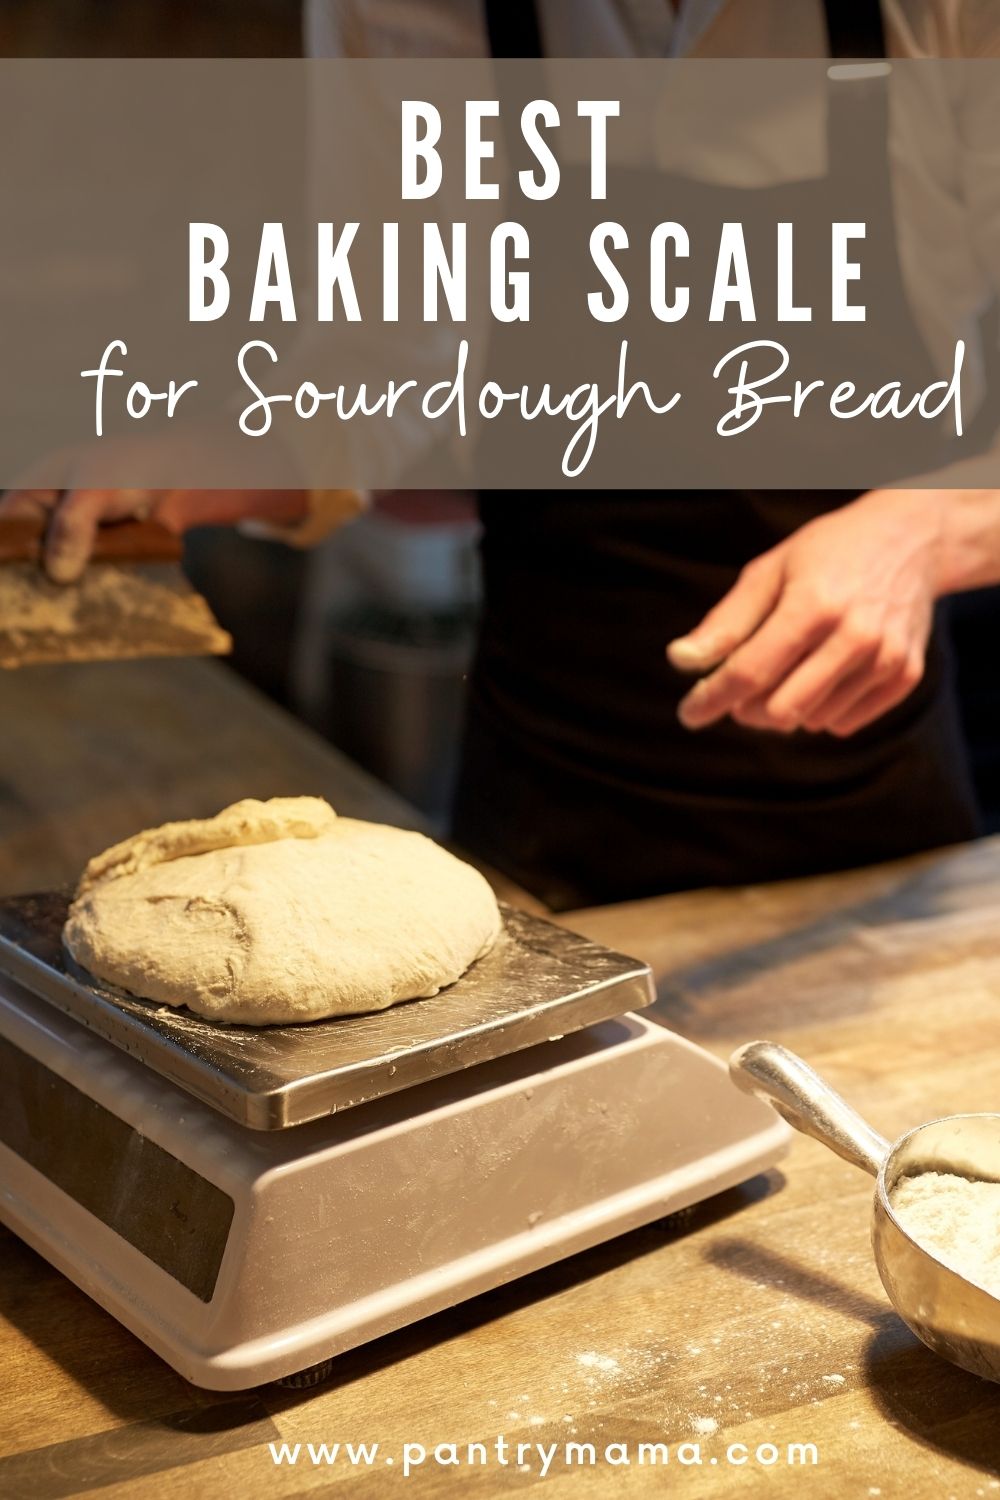 Bake With a Scale to Make Cookies, Cakes, and Breads With More